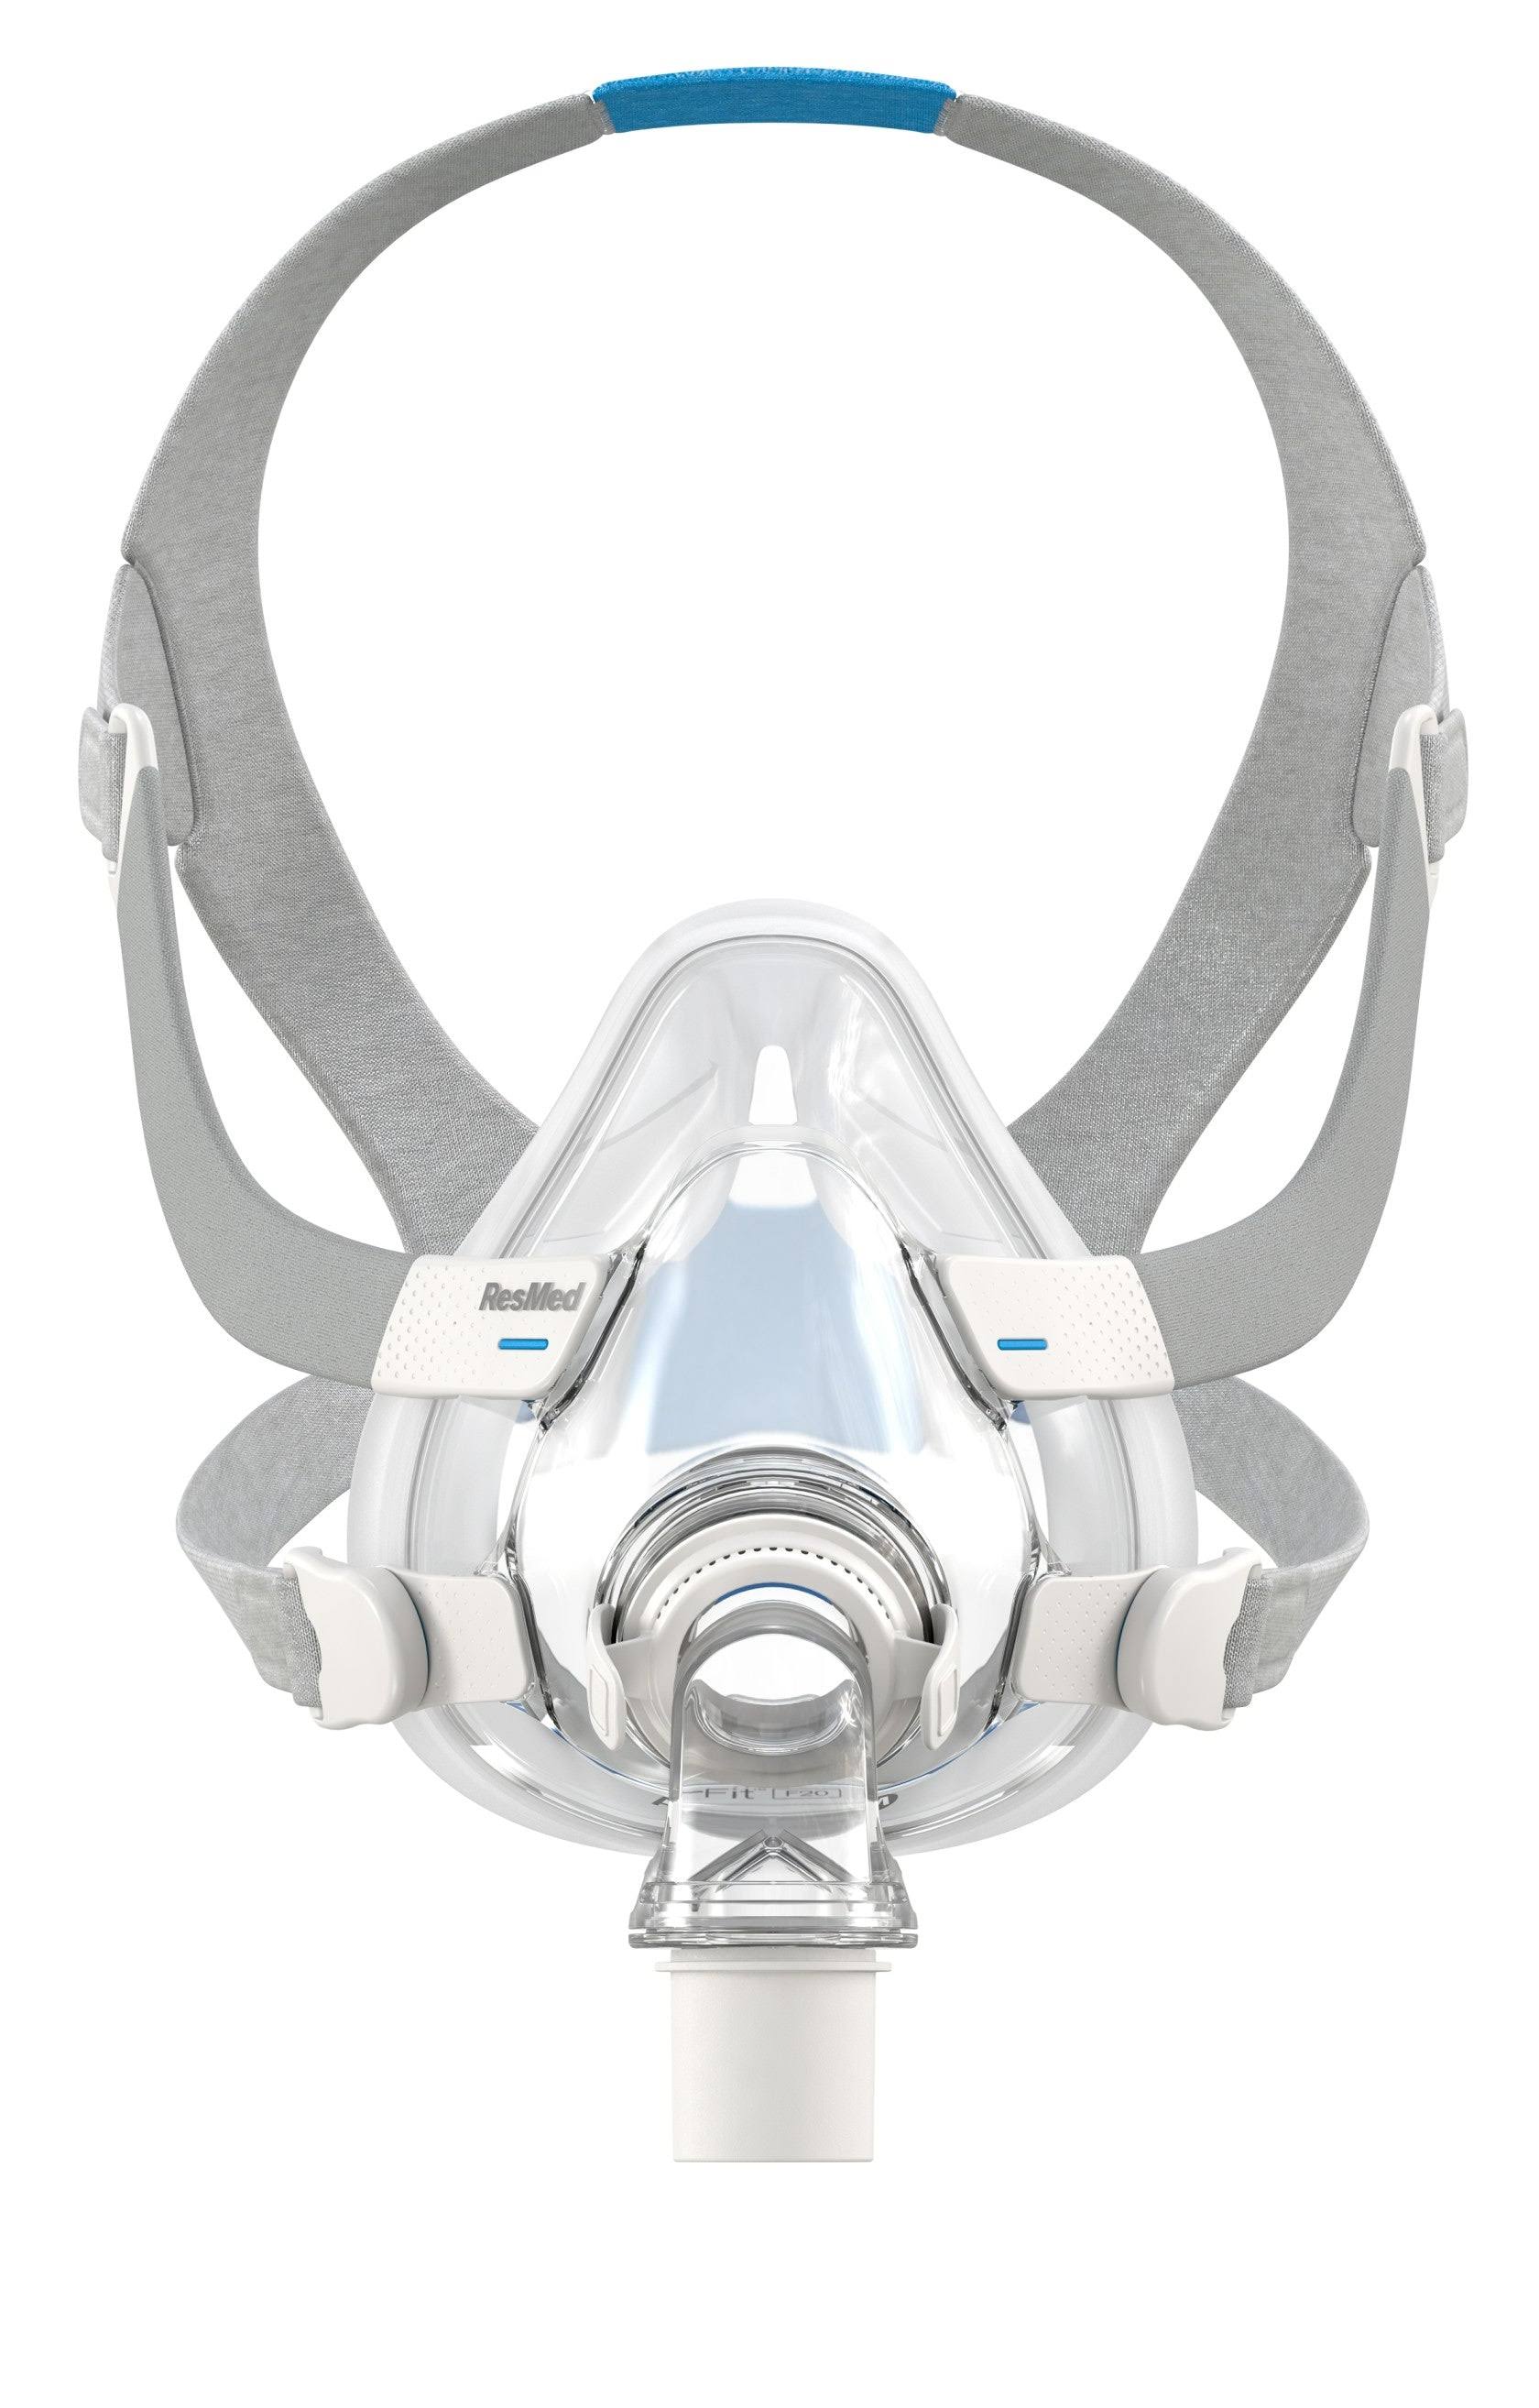 ResMed AirFit F20 Large Full Face Mask with Headgear